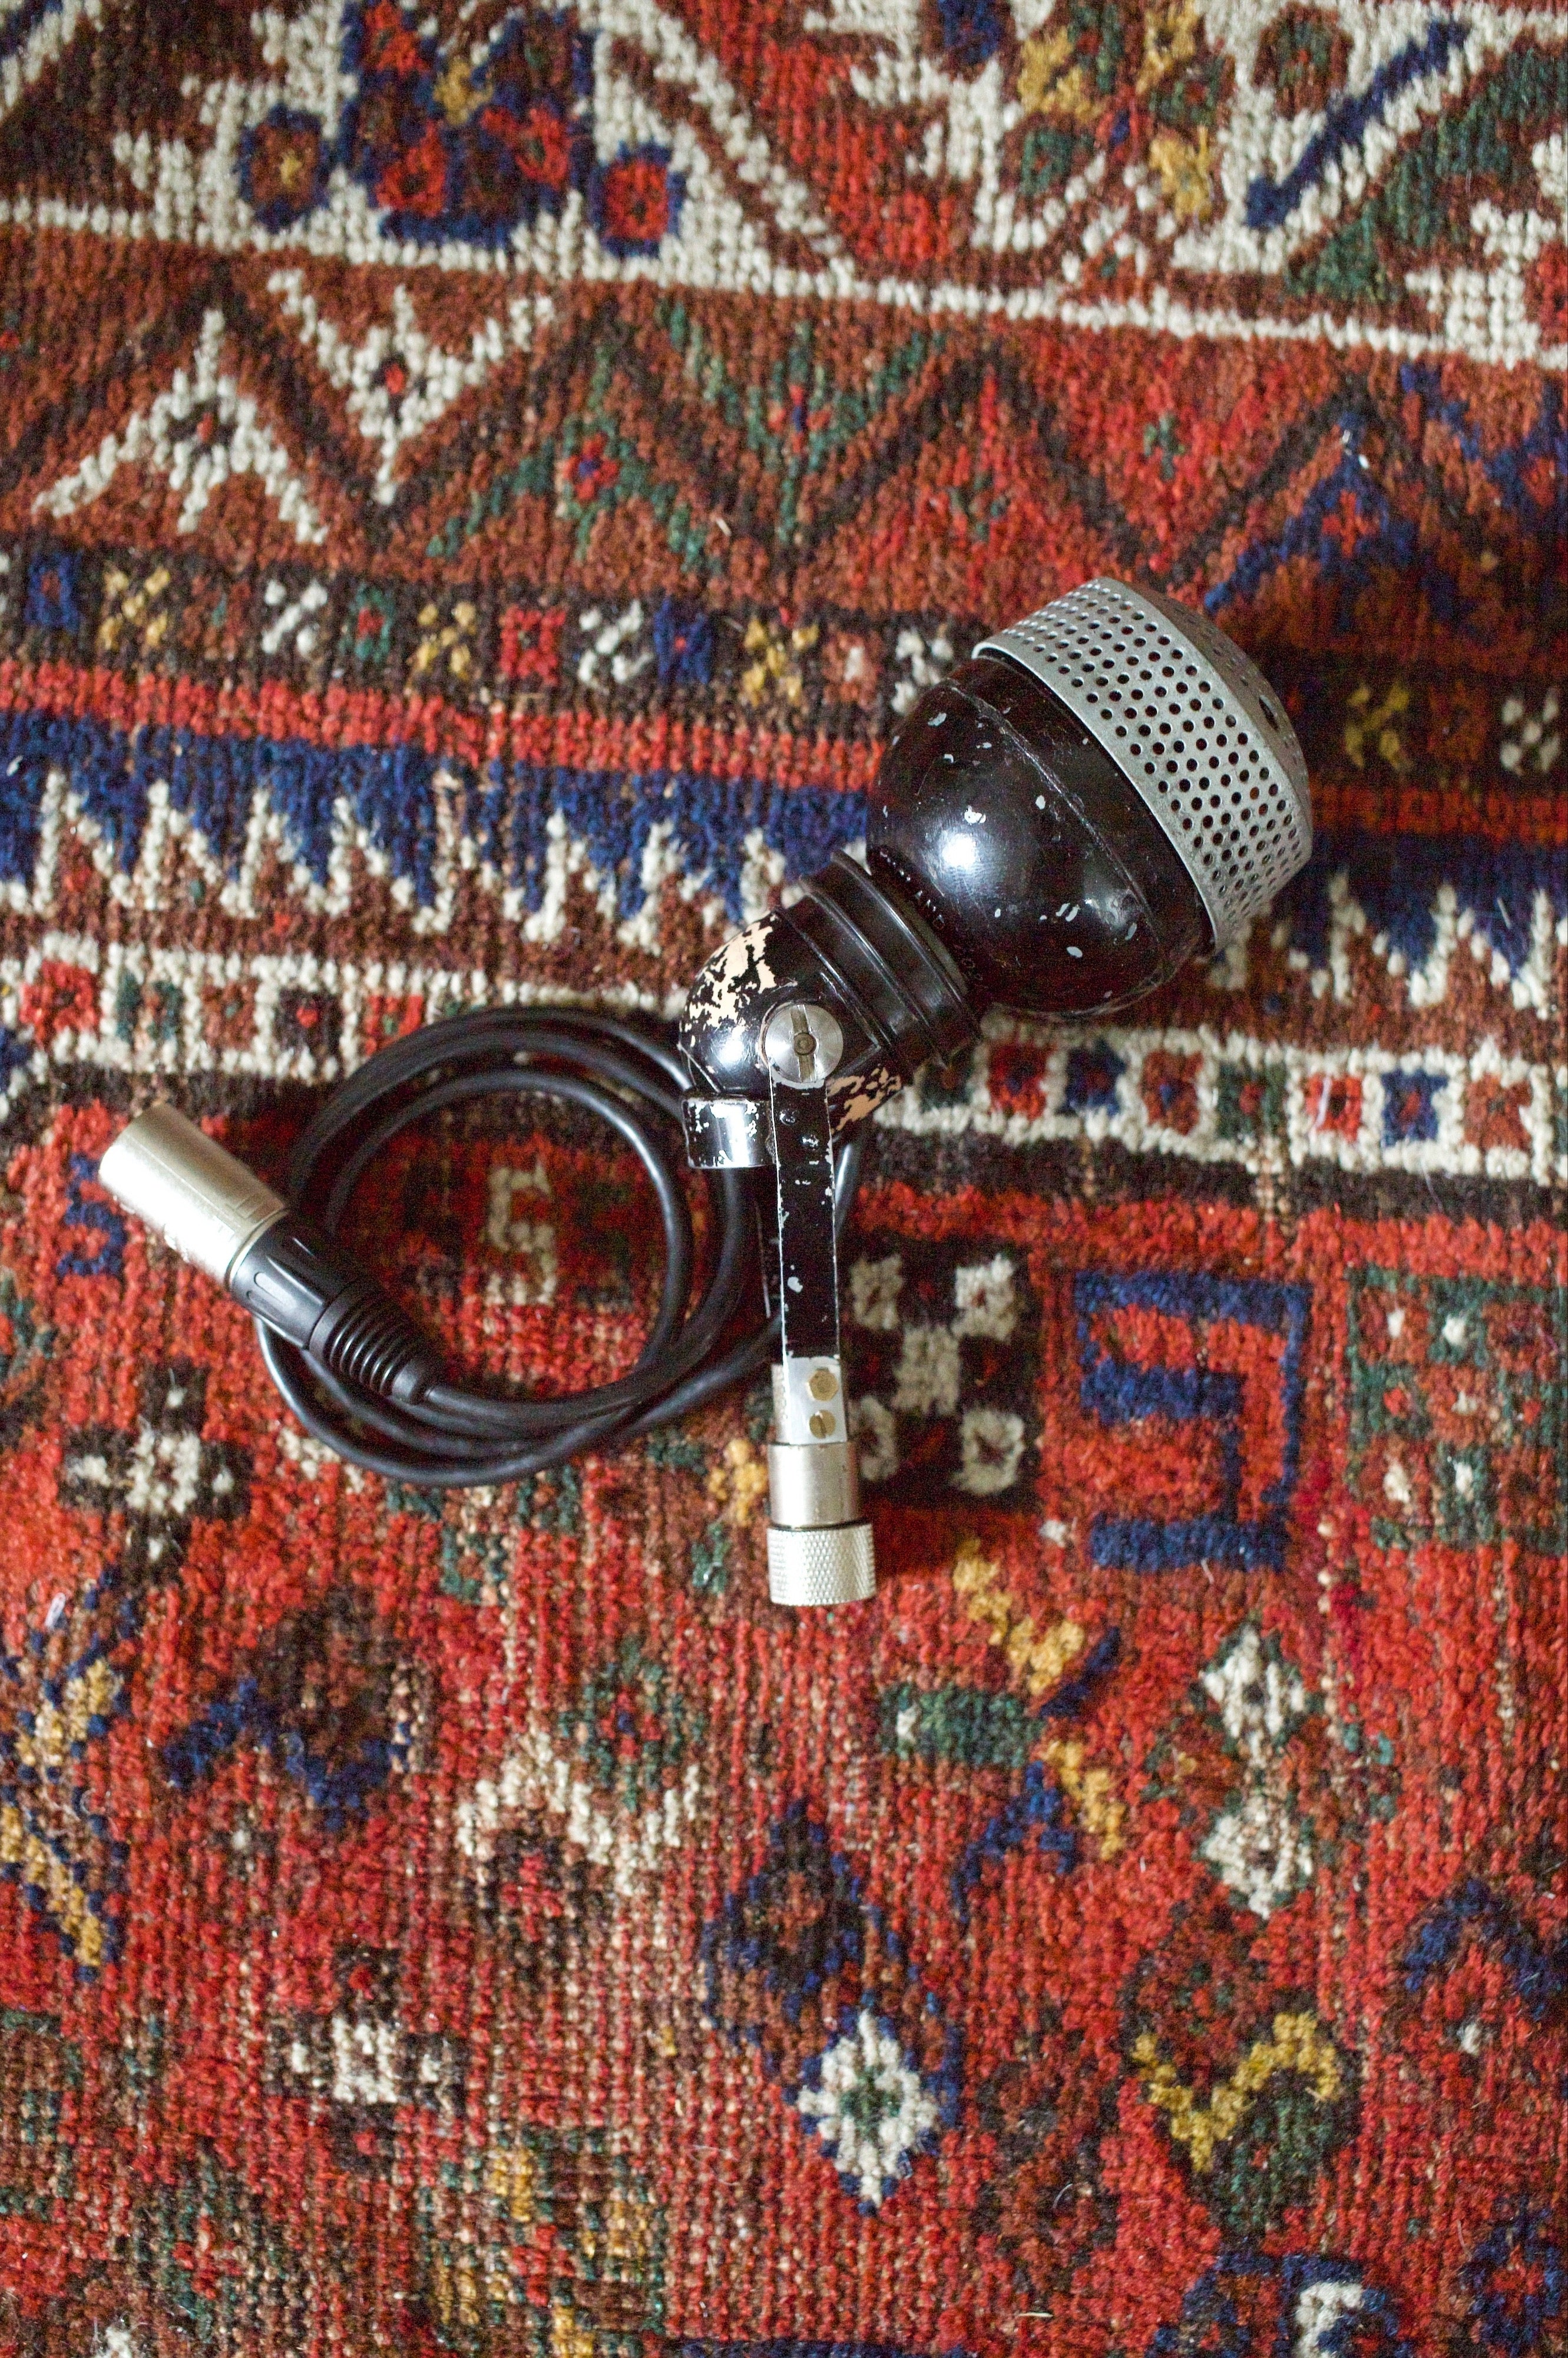 STC 4021C "Ball and Biscuit" Dynamic Microphone